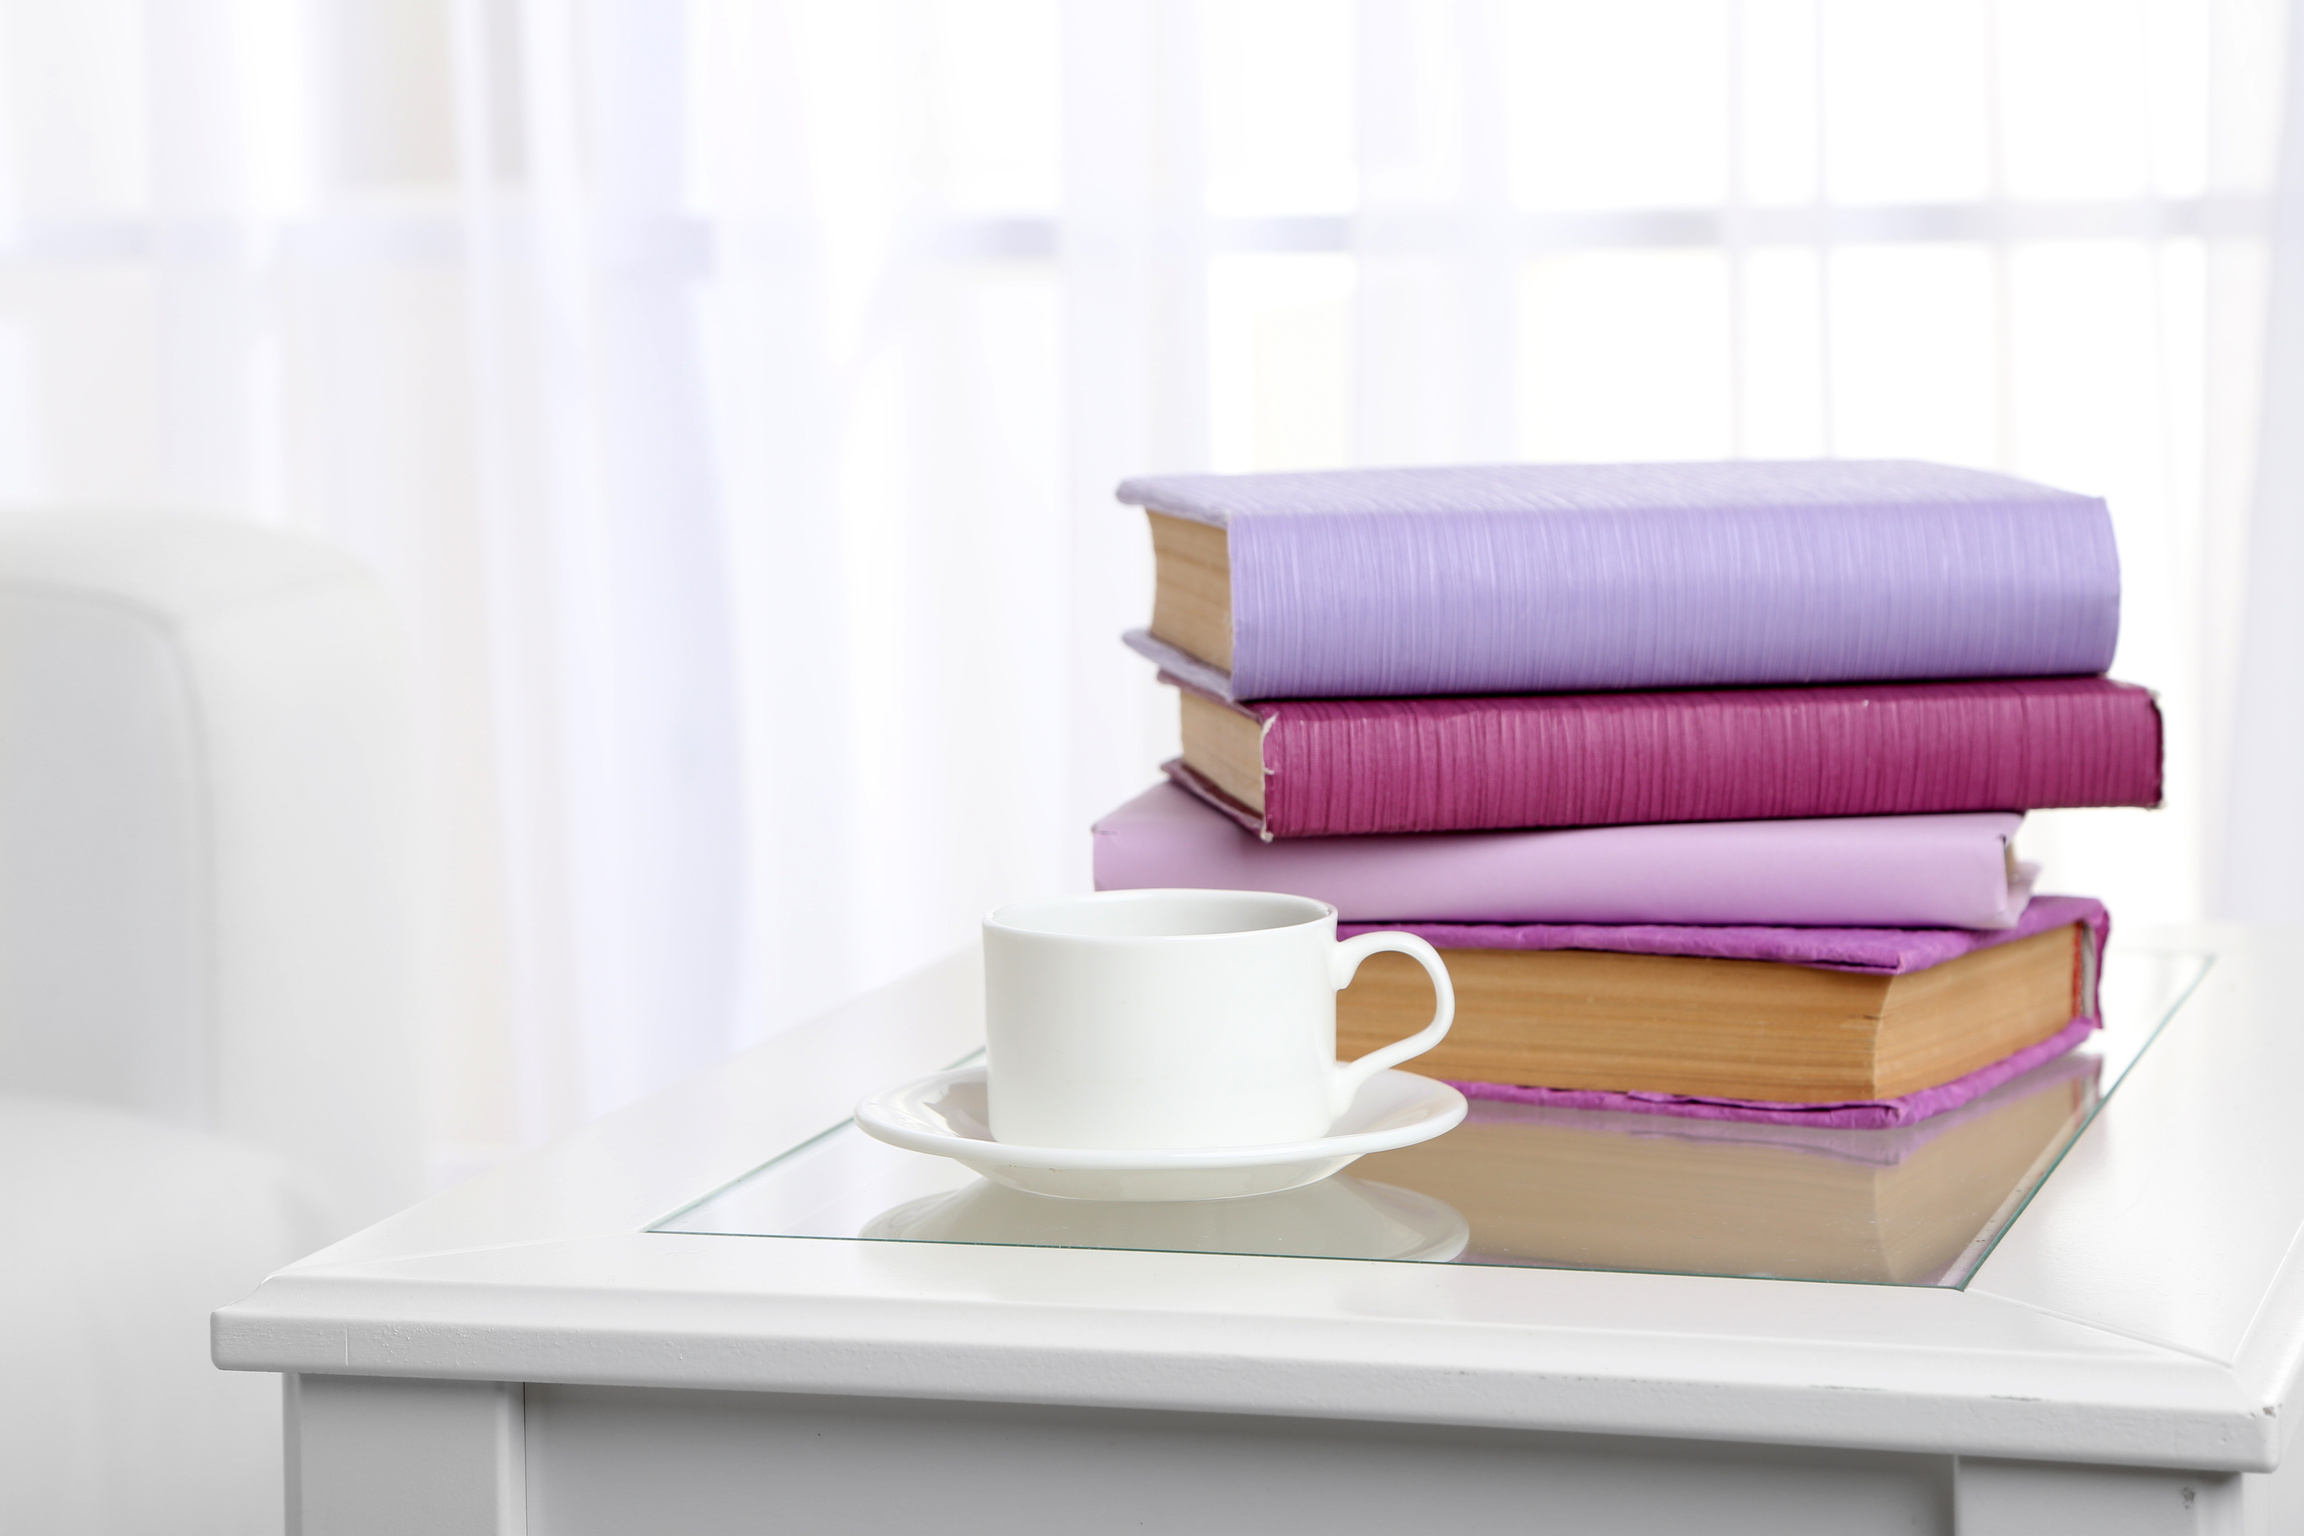 Pile of Purple Books with a Cup on a Table